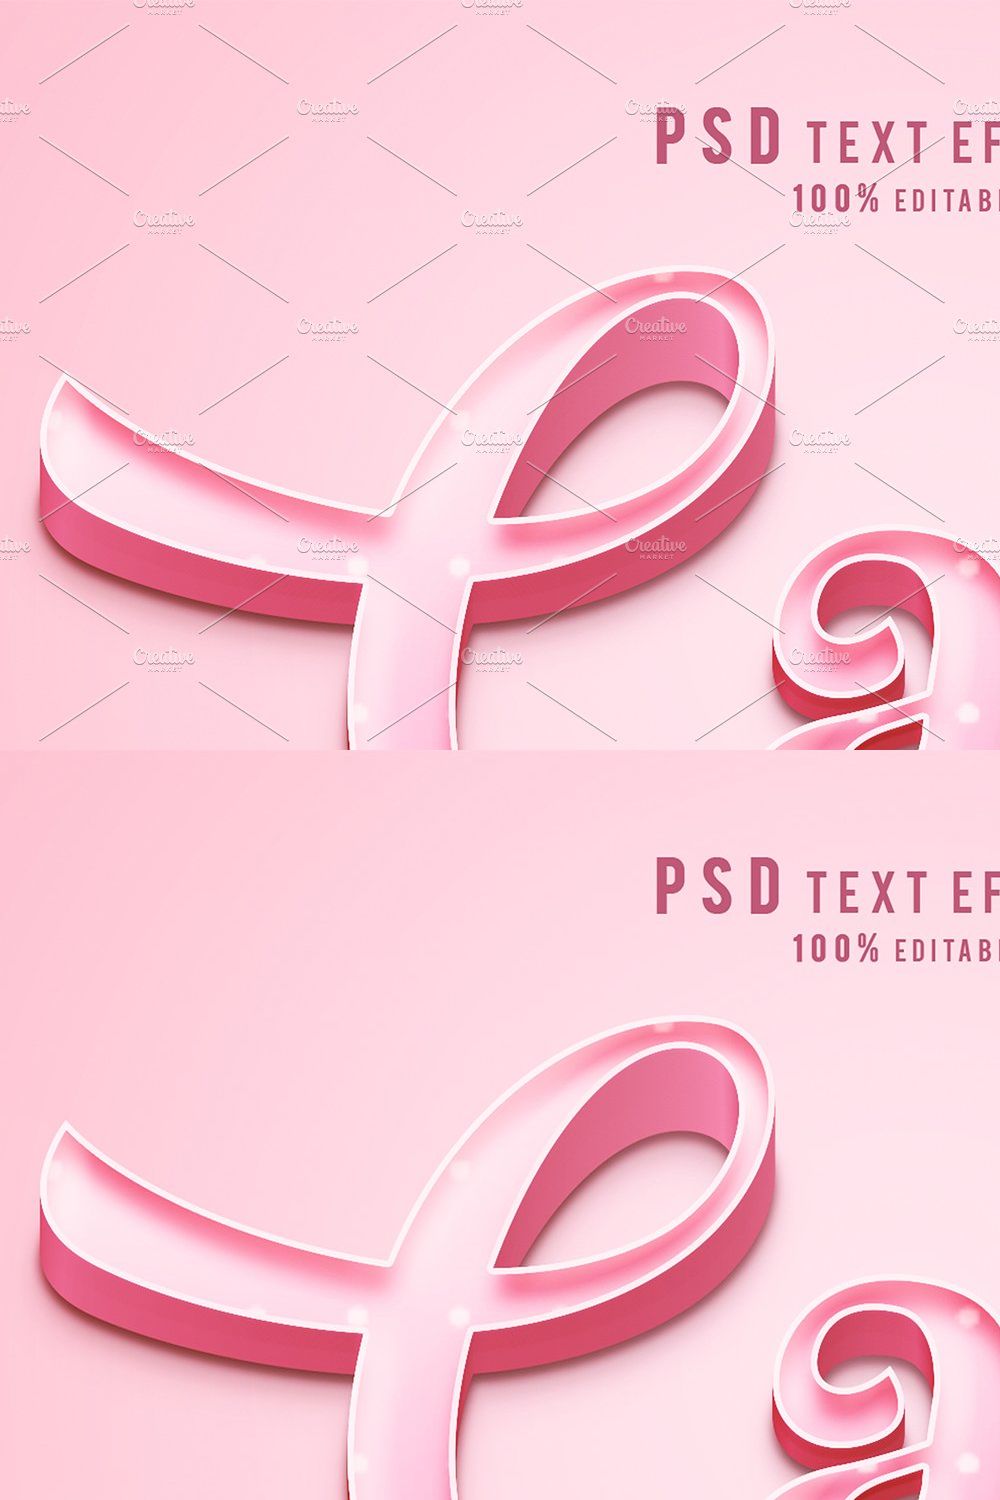 Creative Care 3d text effects pinterest preview image.